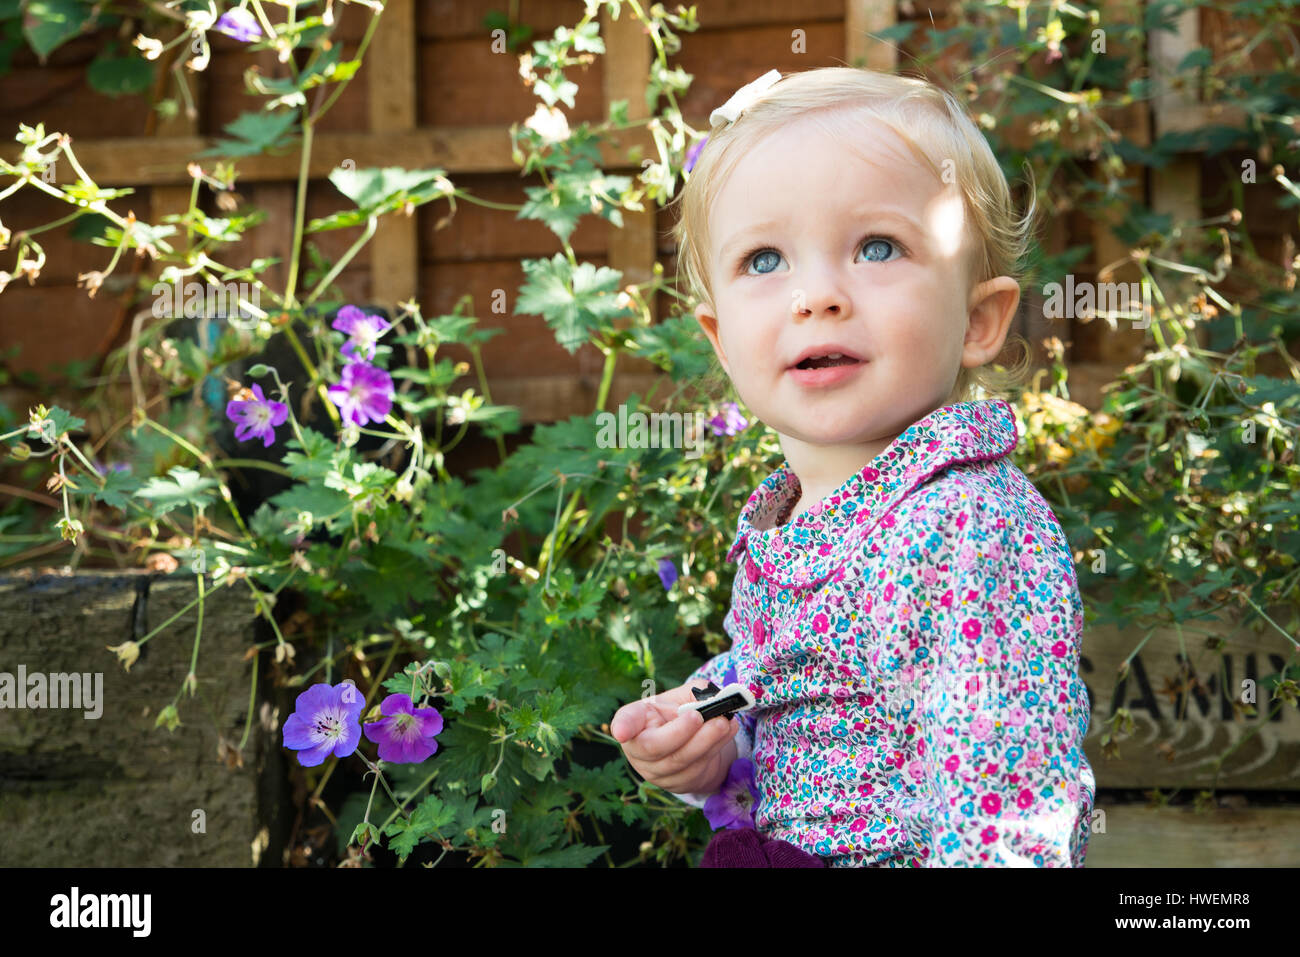 Blue eyed baby girl looking up in garden Stock Photo